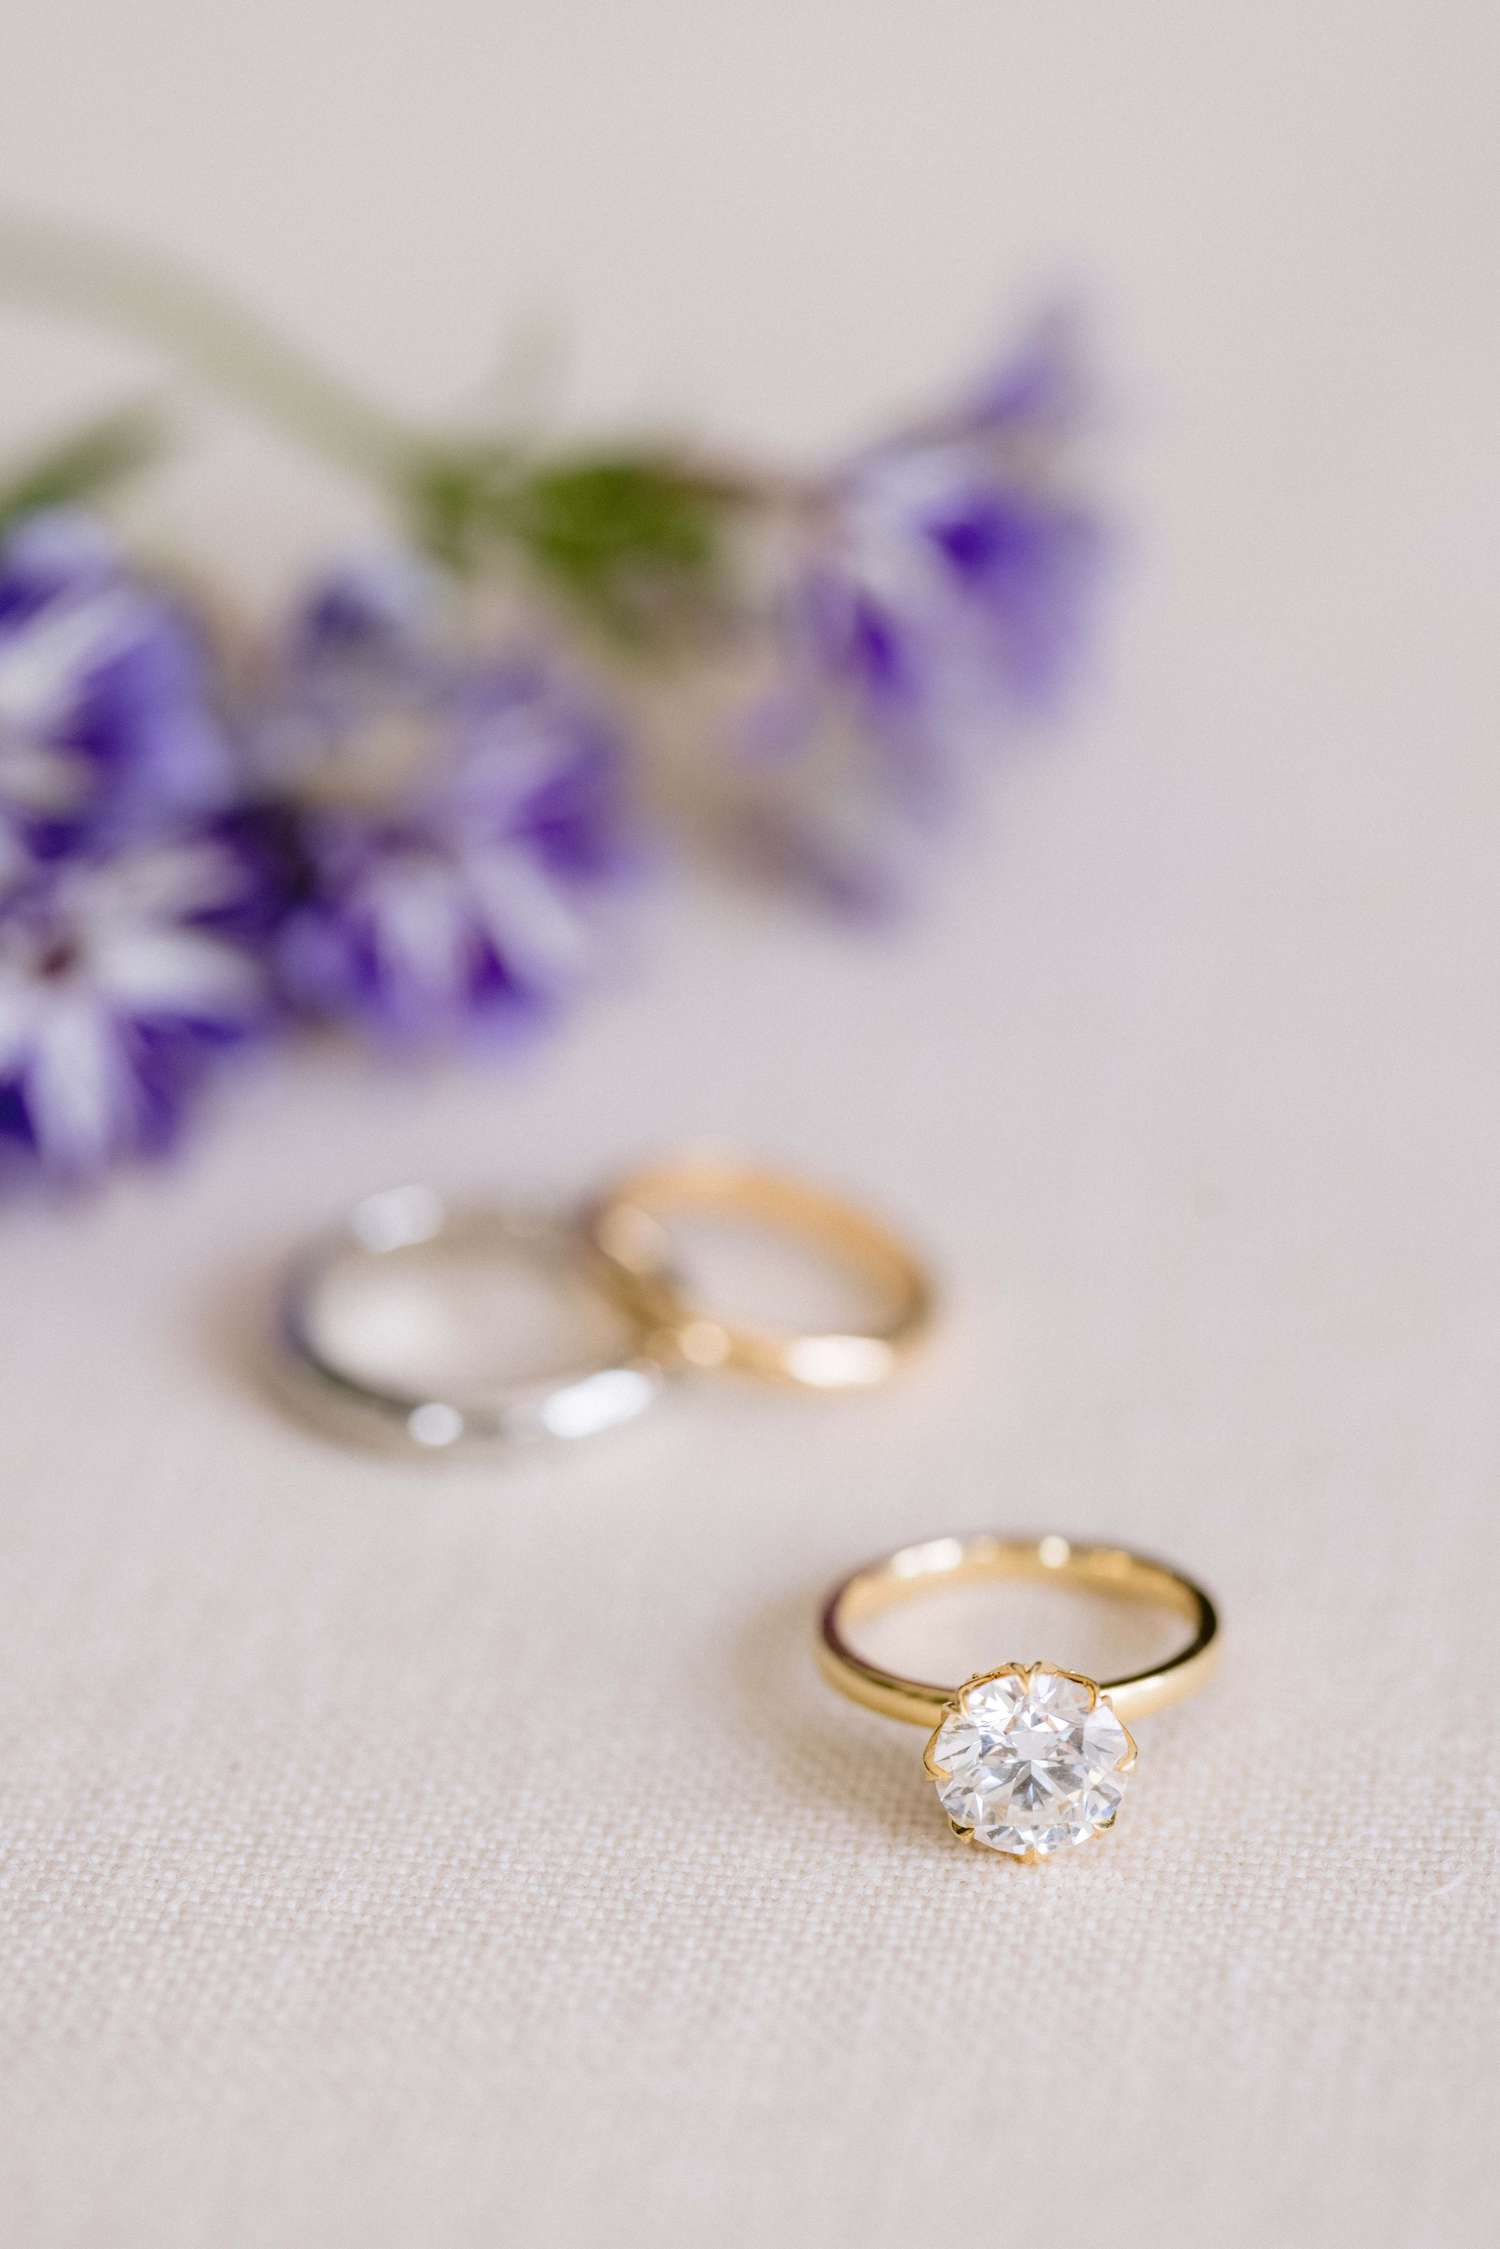 still shot of diamond engagement ring with a purple flowers slightly blurred in the background